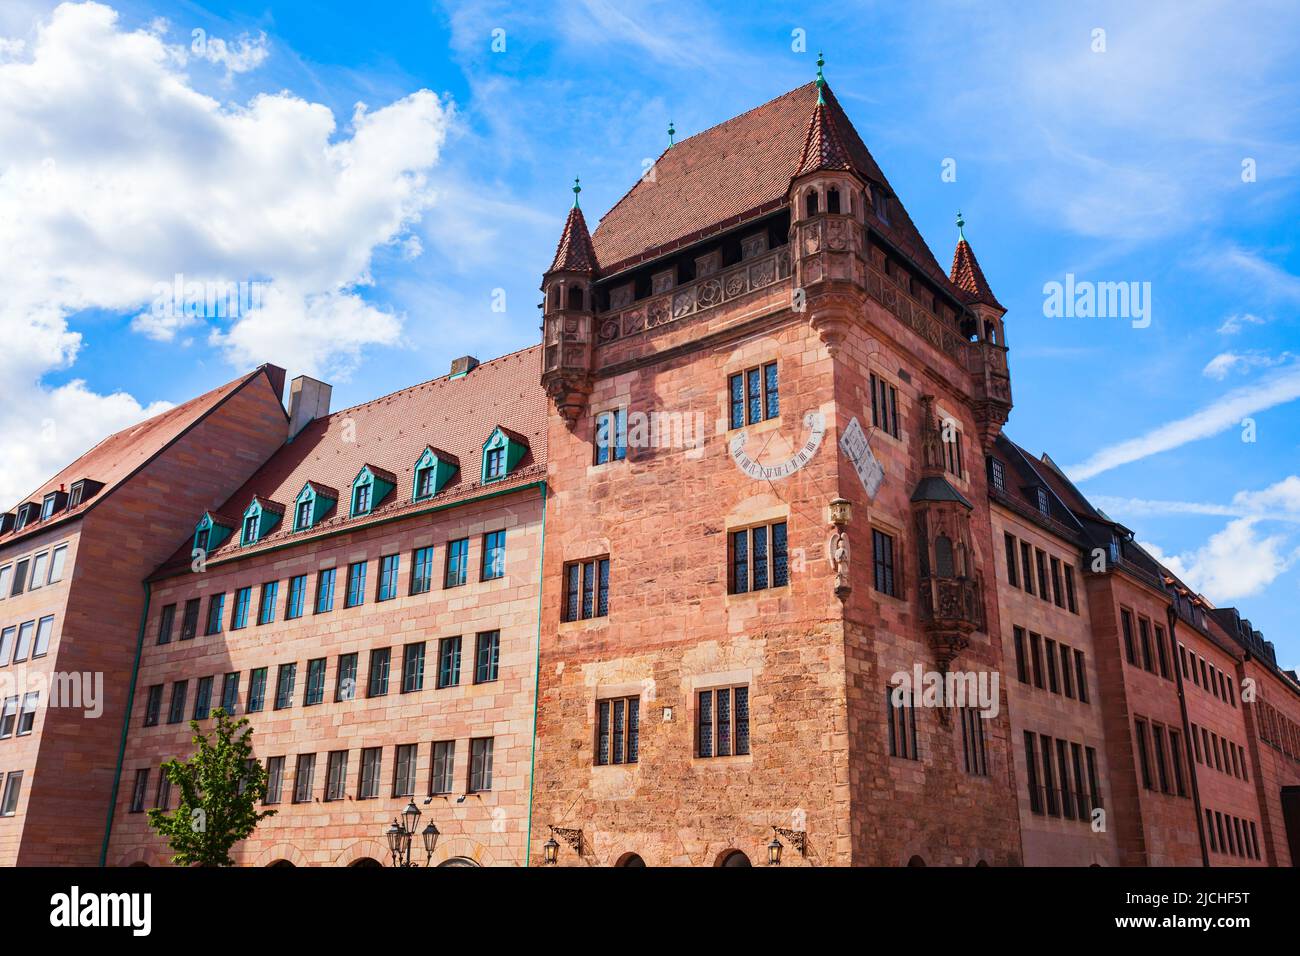 Nassauer Haus is a medieval tower in Nuremberg old town. Nuremberg is the second largest city of Bavaria state in Germany. Stock Photo